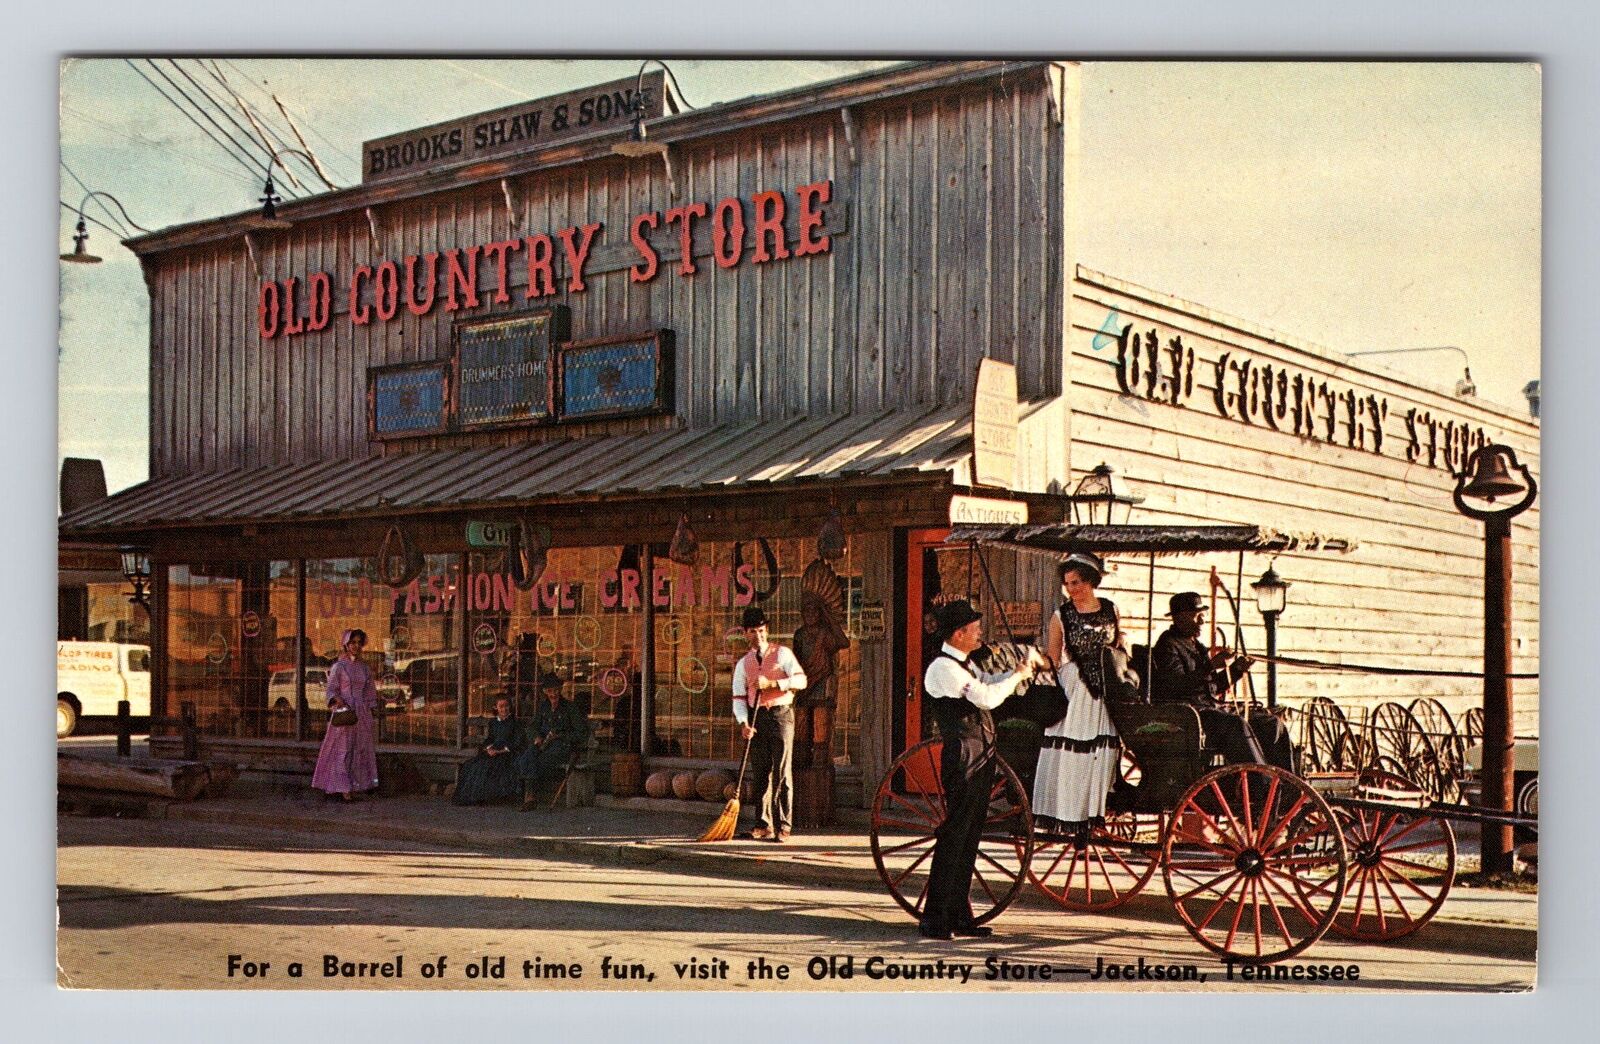 Jackson TN-Tennessee, Old Country Store, Antique, Vintage Souvenir Postcard